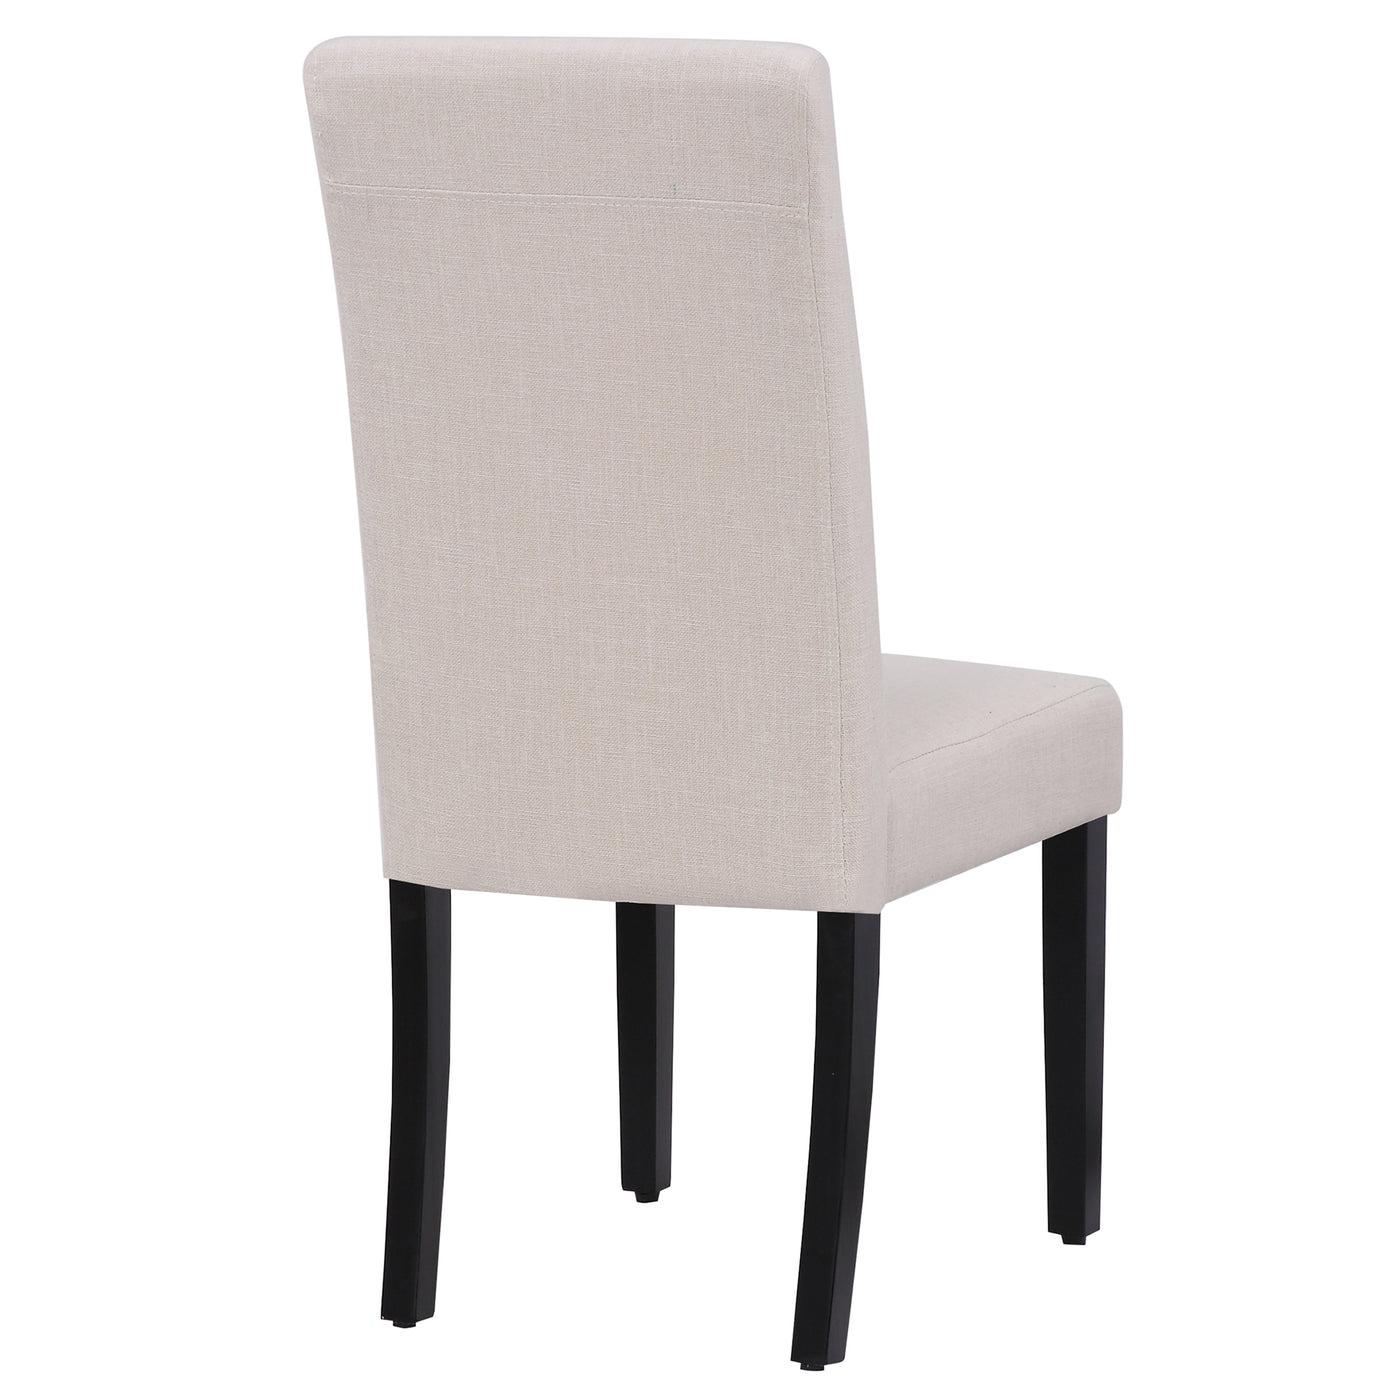 Lenox Upholstered Linen Fabric Dining Chair (Set of 2)